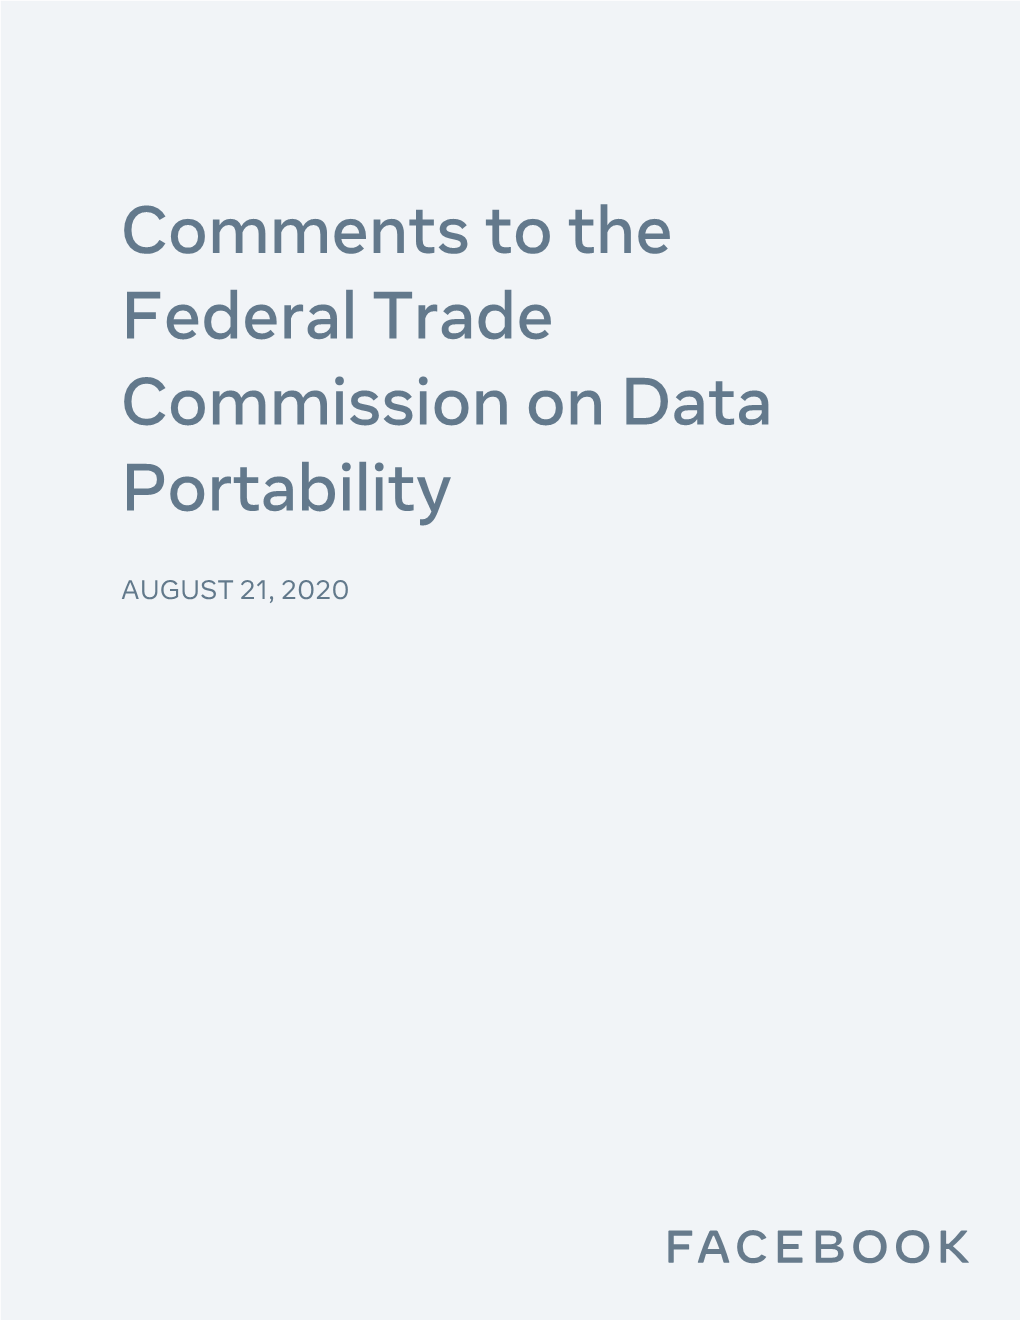 Comments to the Federal Trade Commission on Data Portability